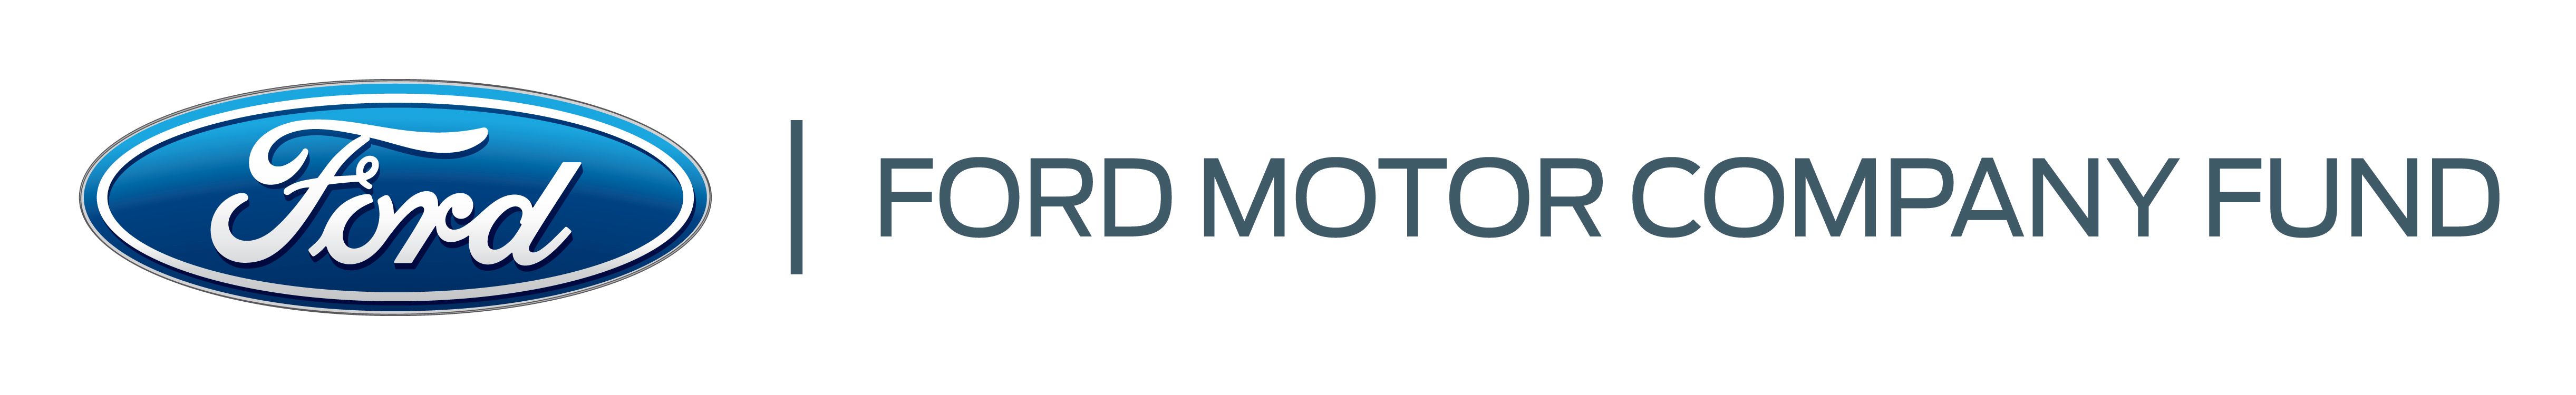 logo for Ford Motor Company Fund